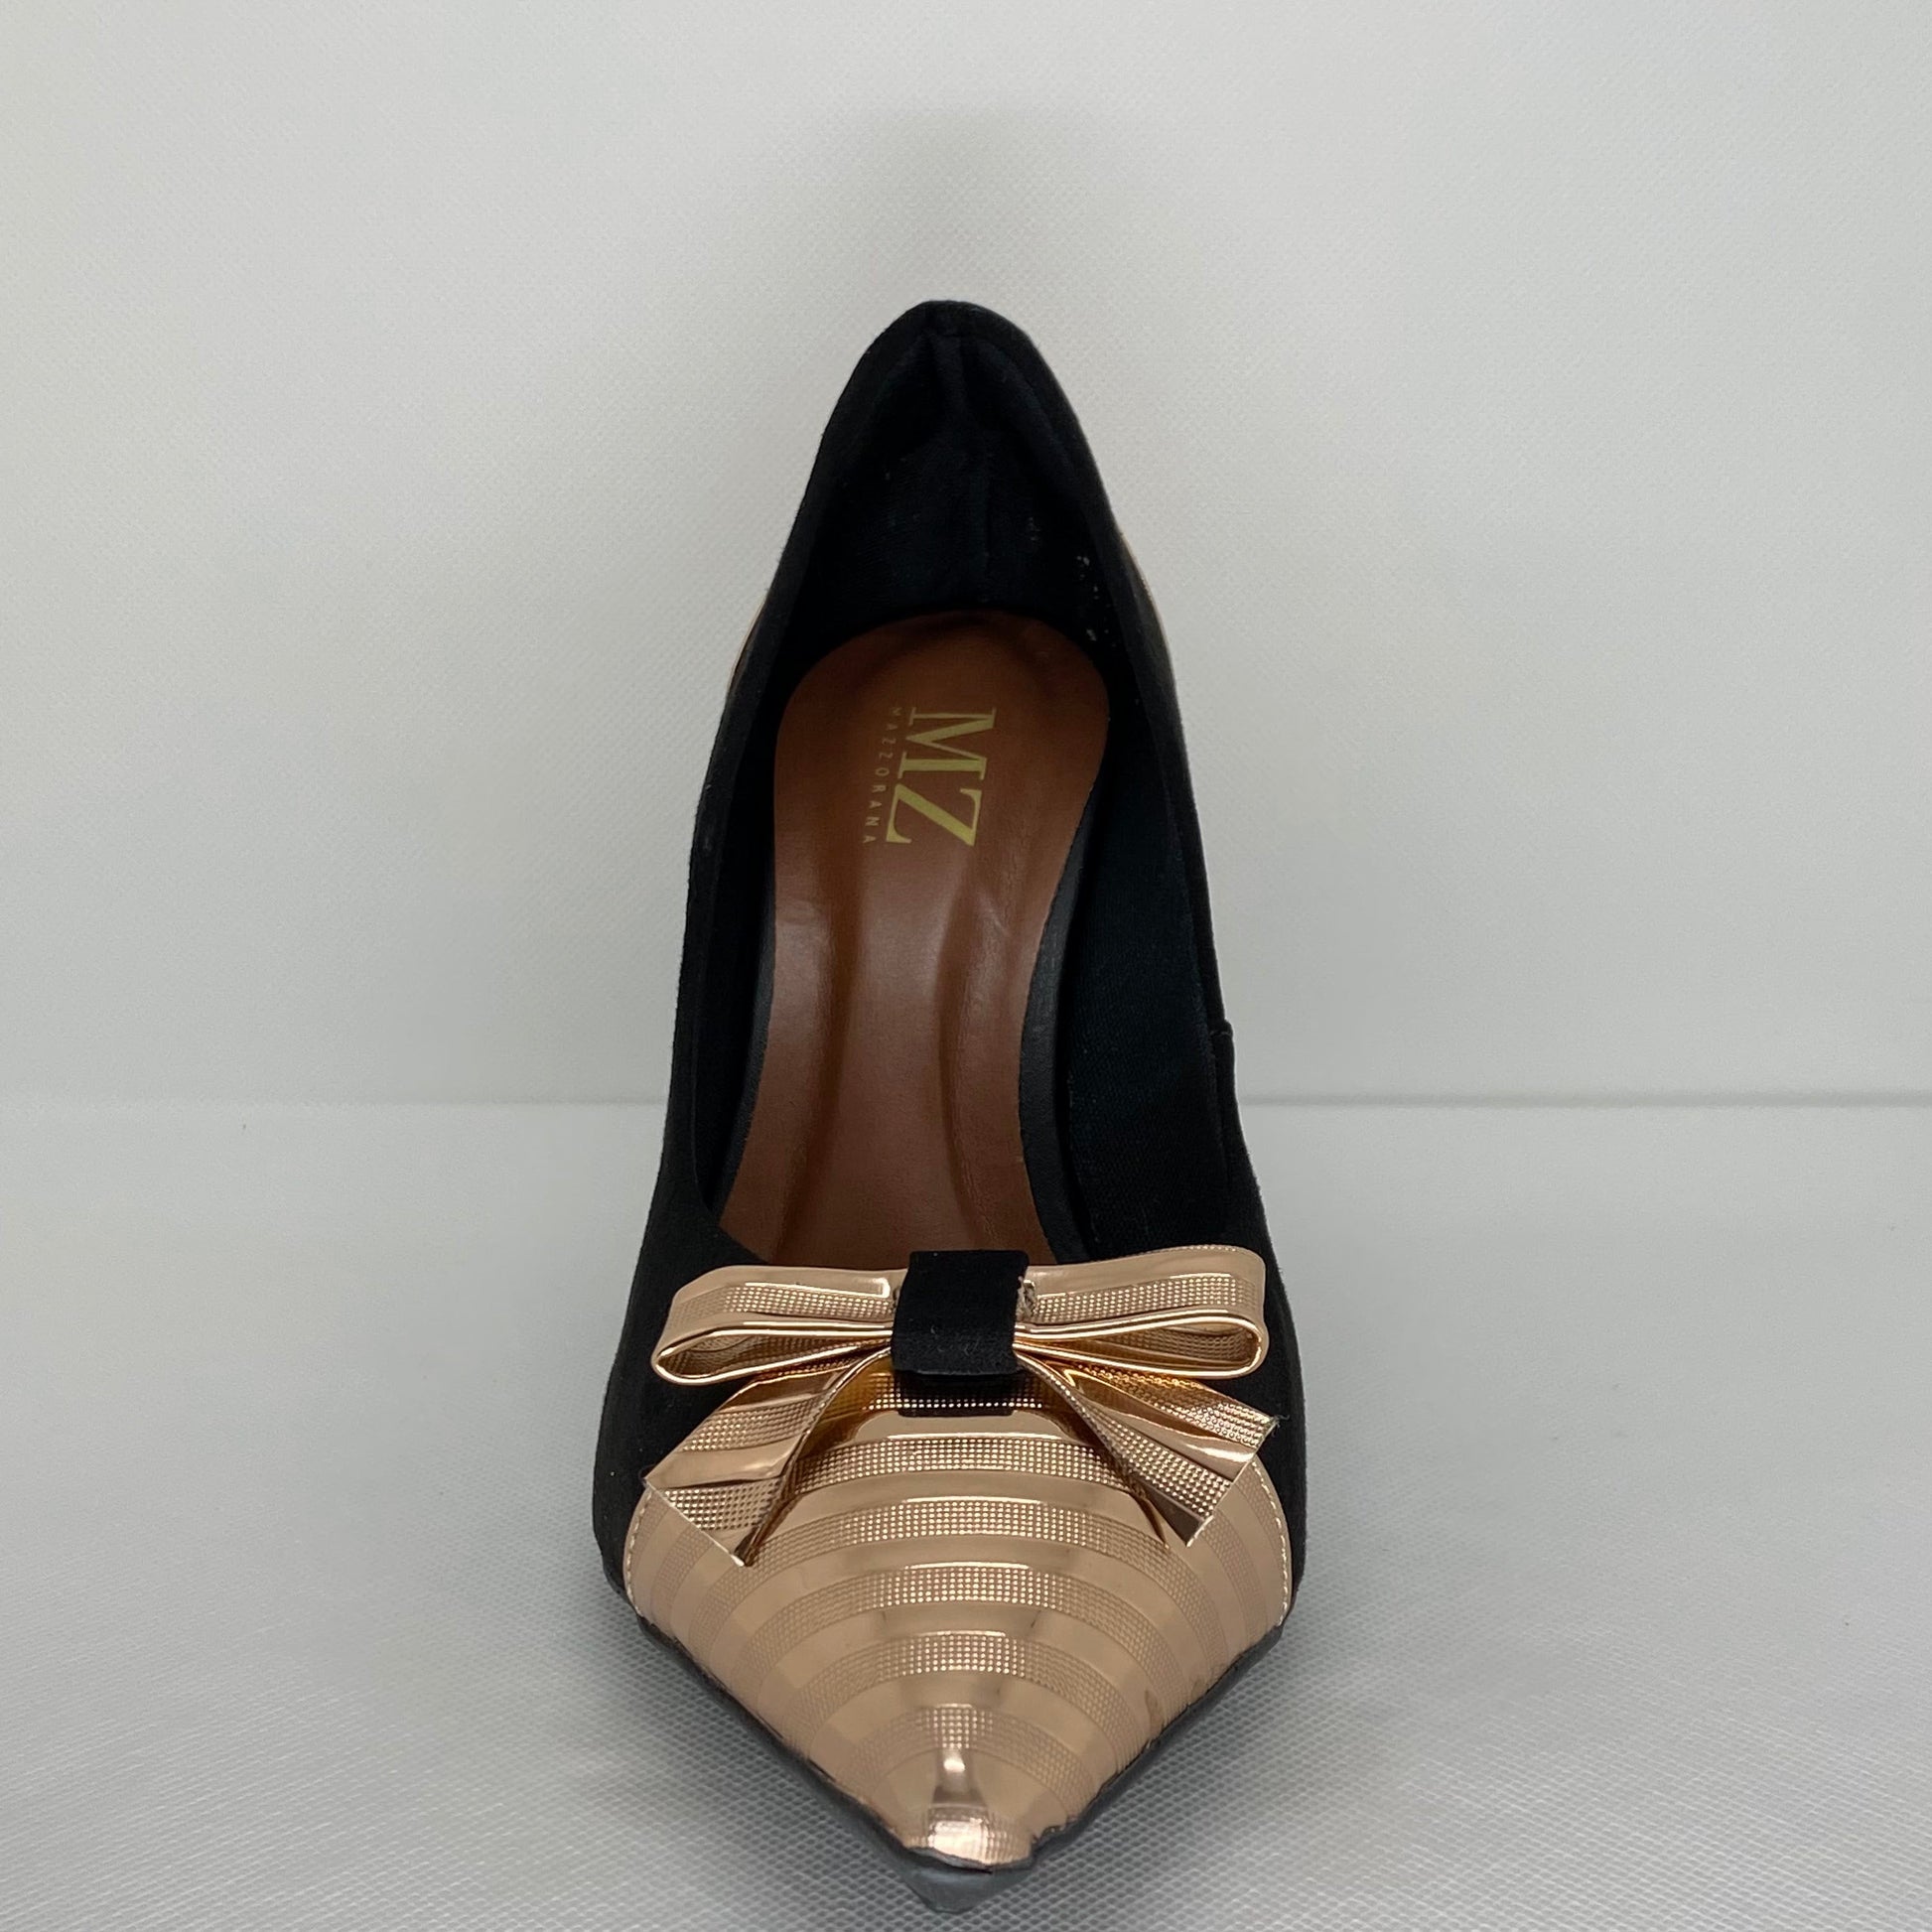 Women pumps black and gold